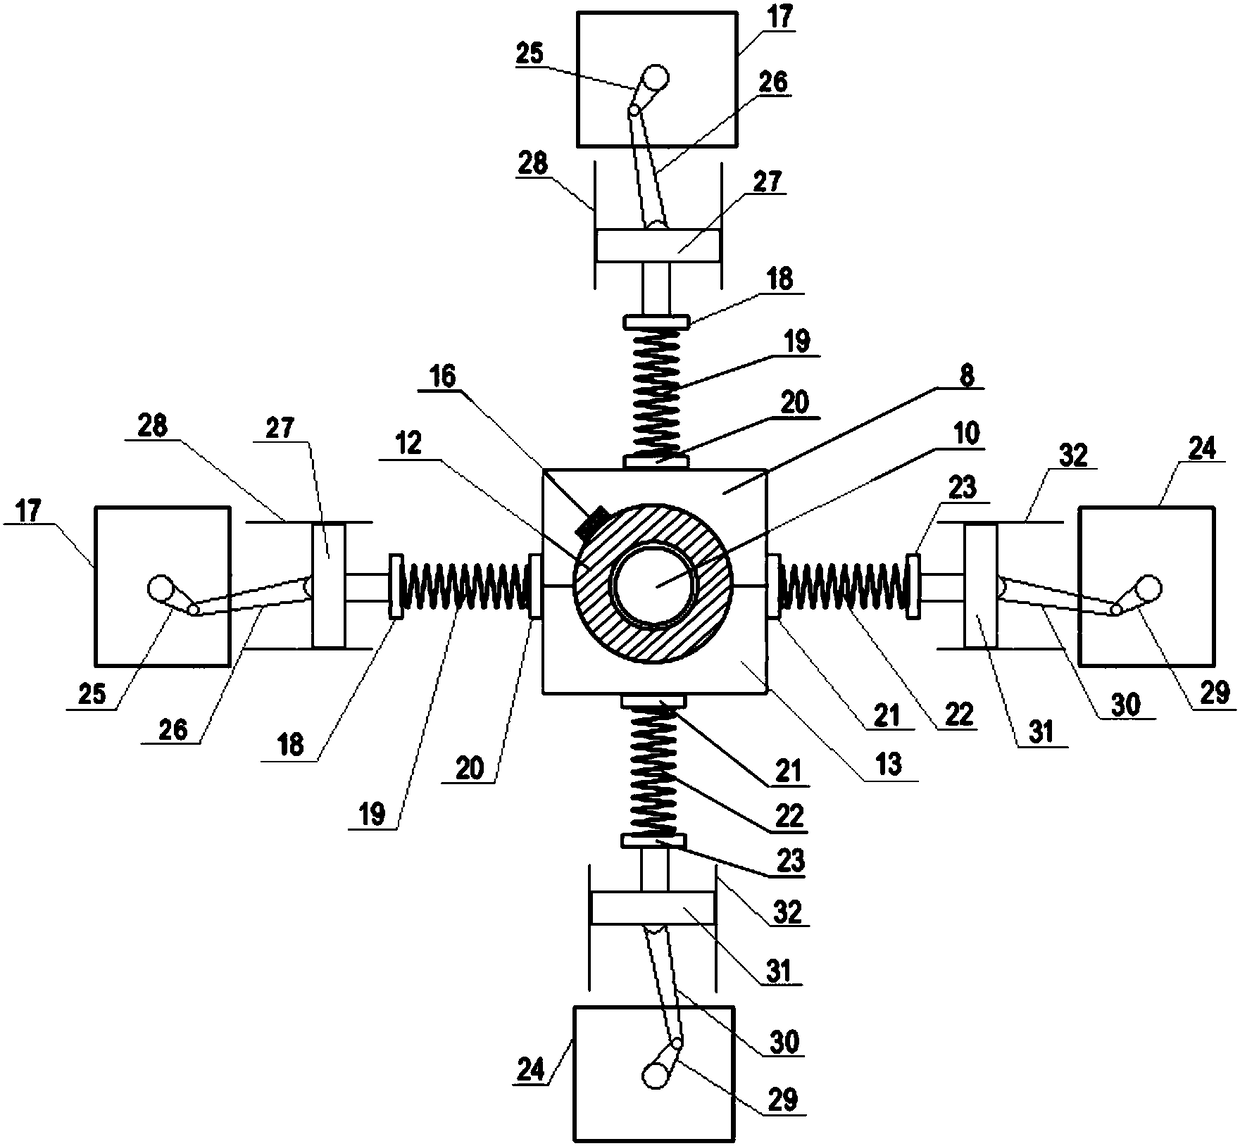 Rolling bearing performance testing device capable of applying radial alternating load based on crank connecting rod